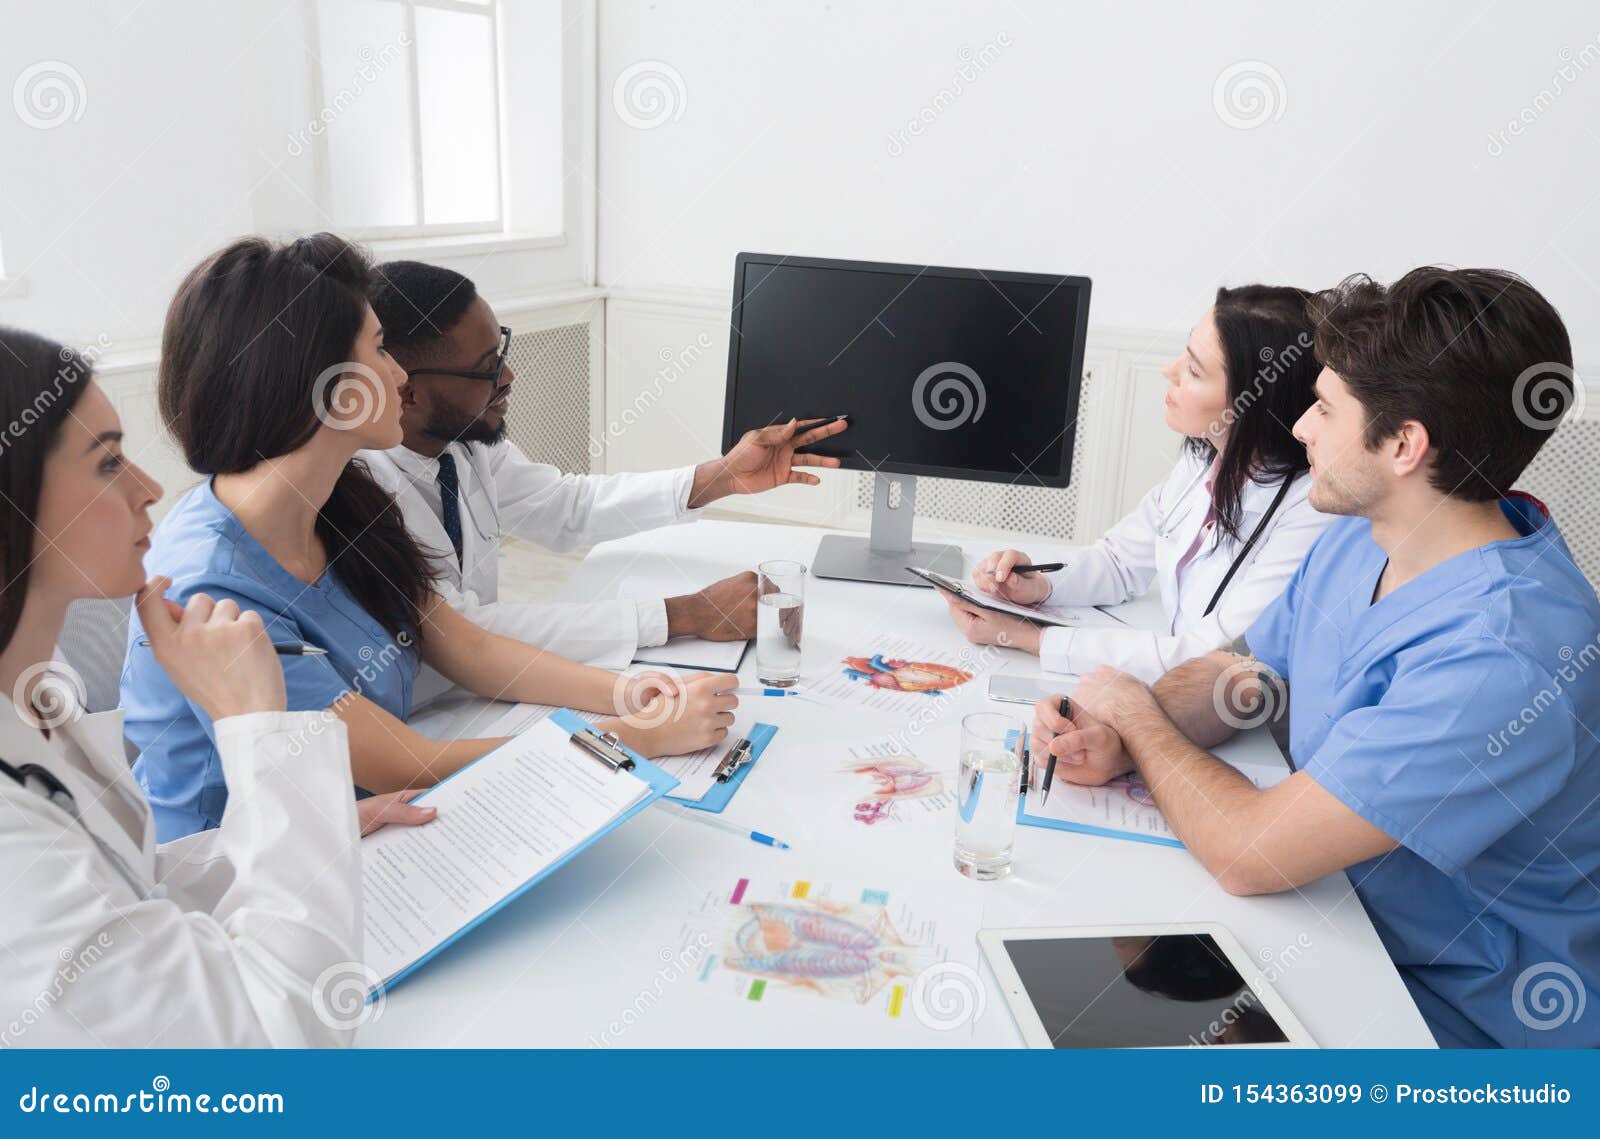 Doctors Having Lecture And Taking Notes In Meeting Room Stock